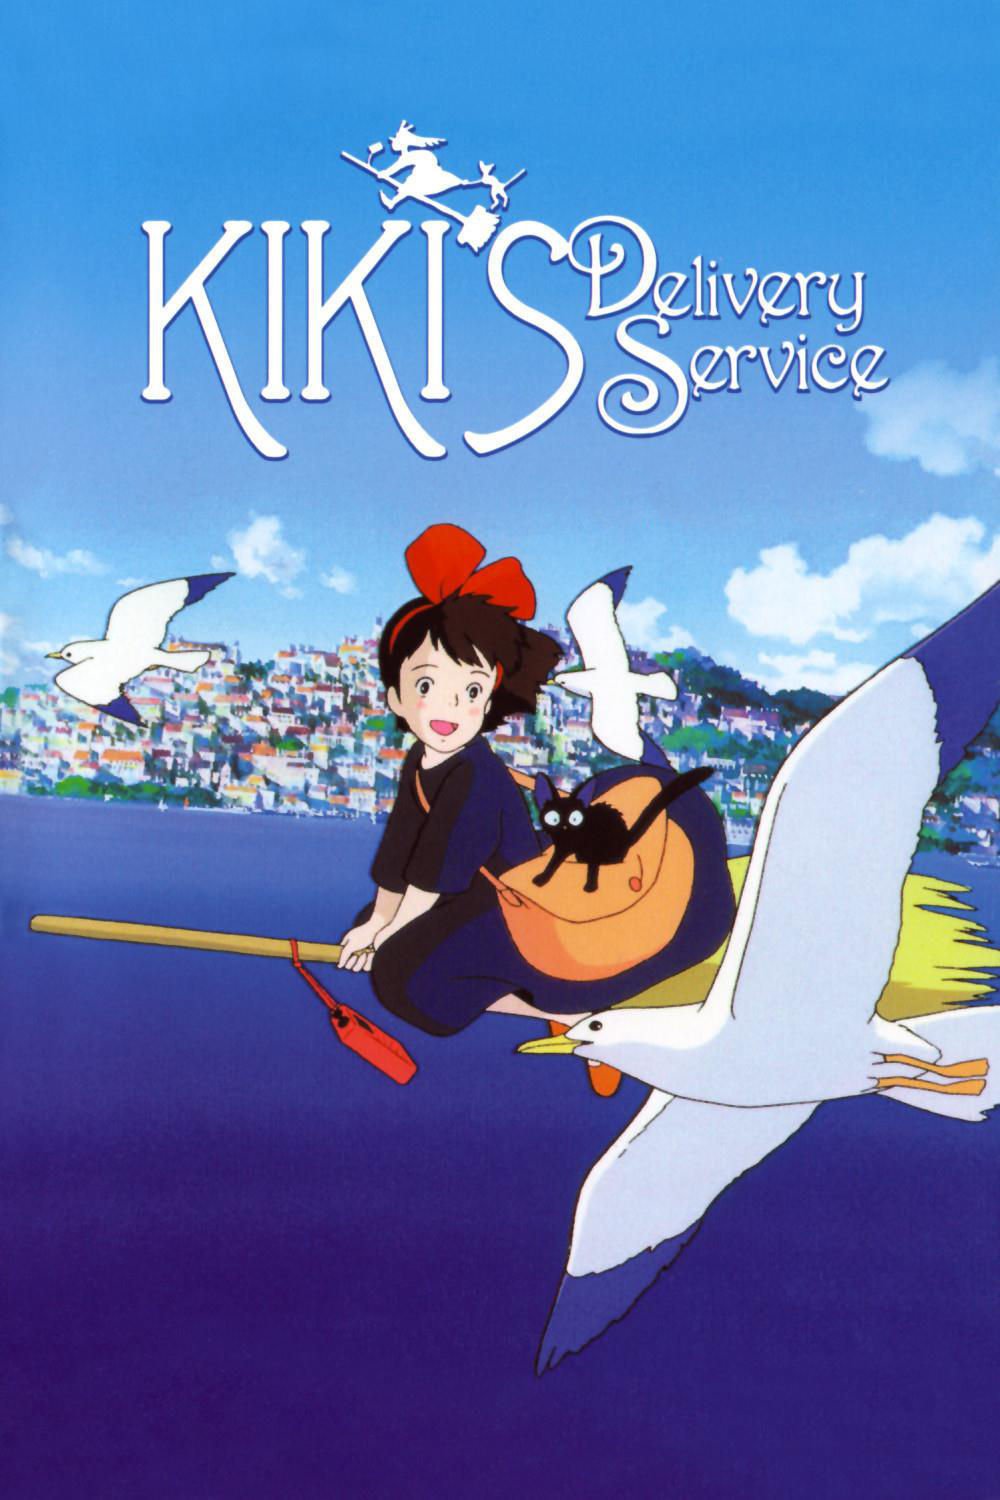 Poster for the movie "Kiki's Delivery Service"